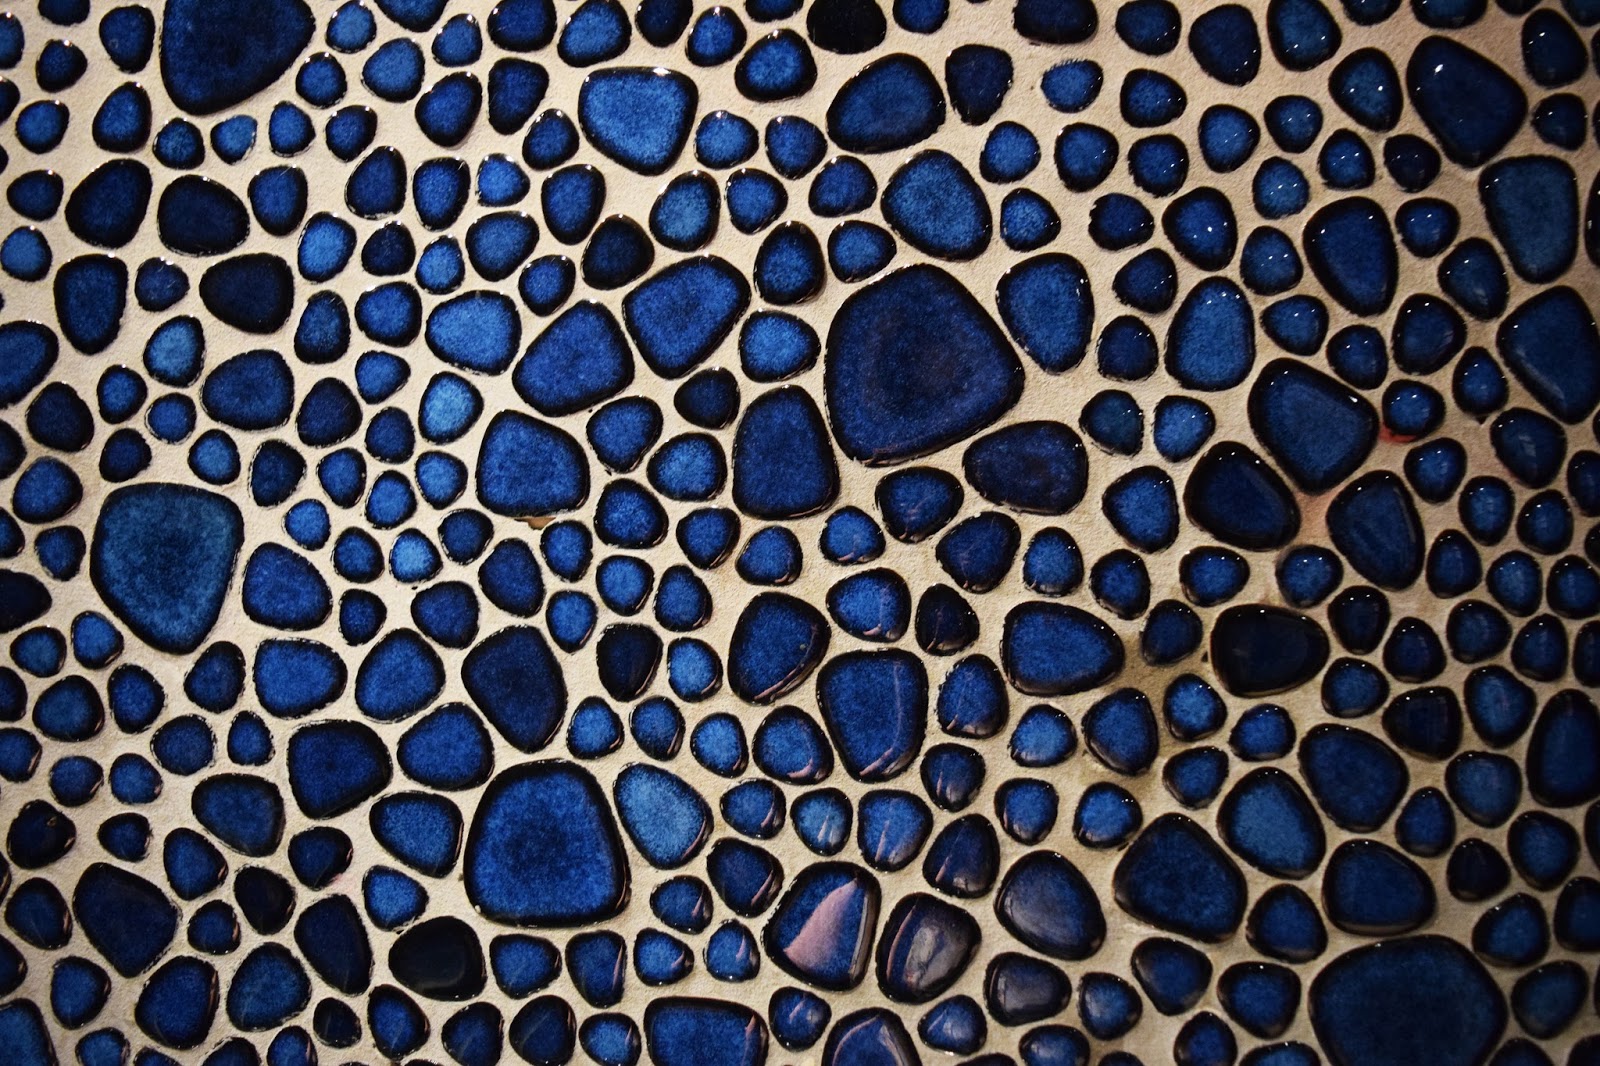 a closer detail of the blue mosaic stones on the walls